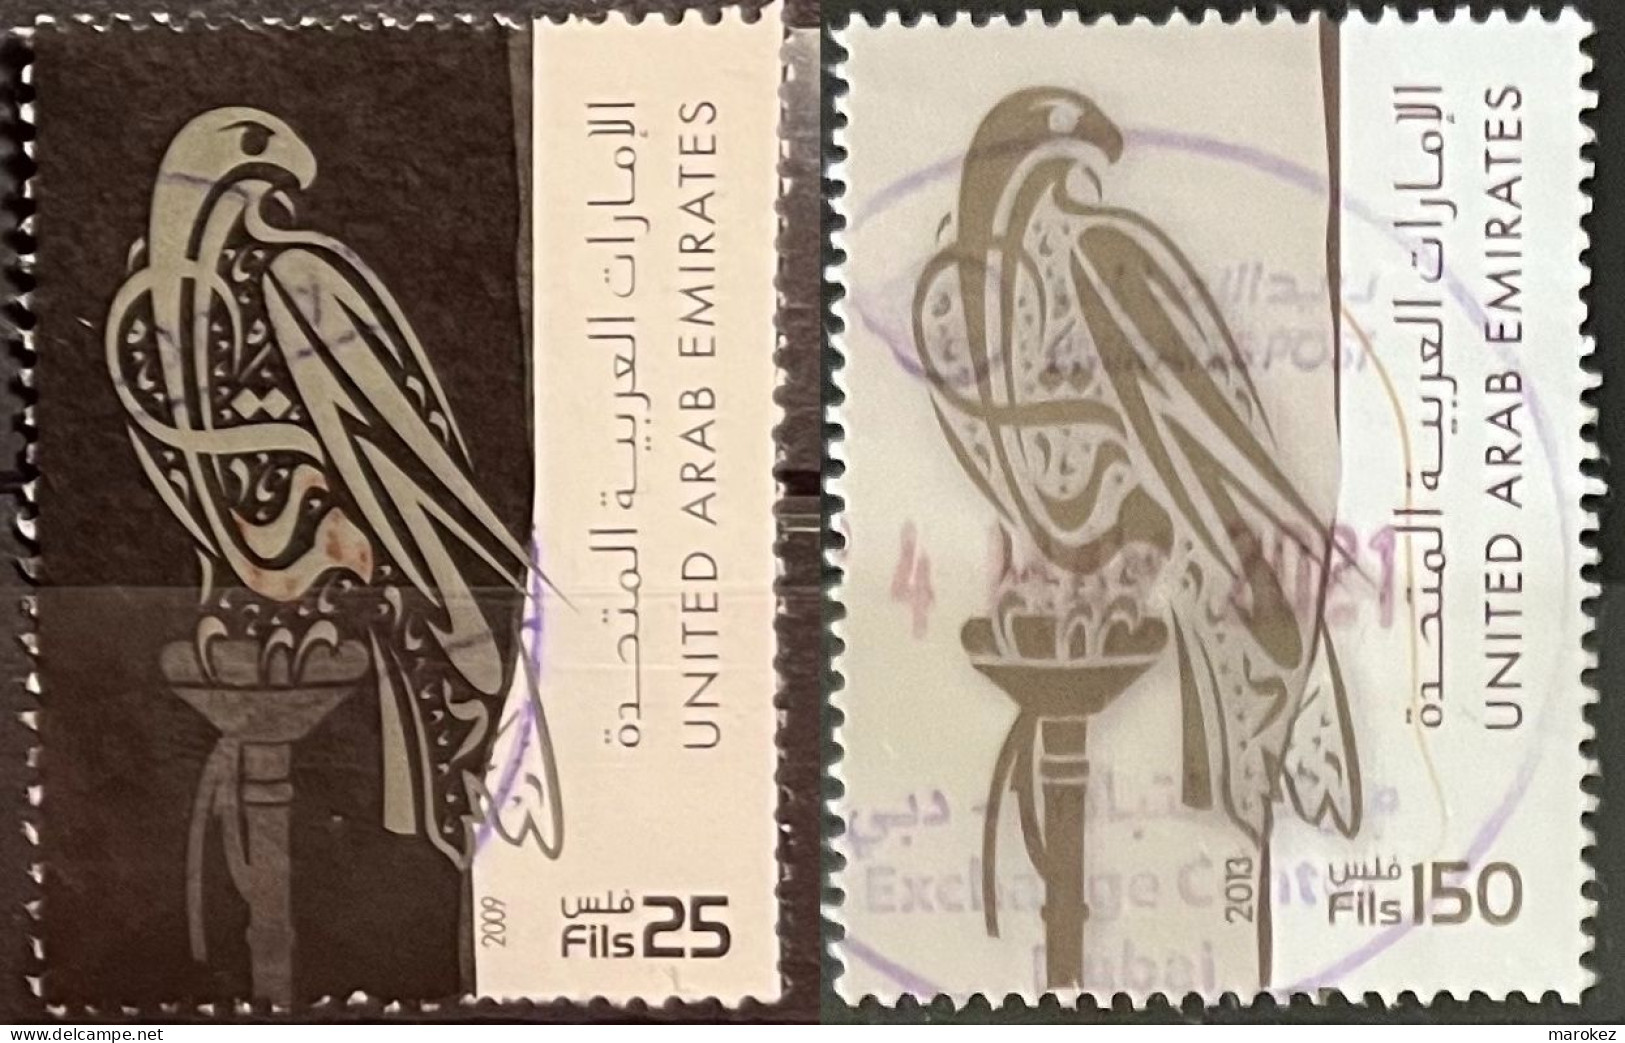 UAE 2009-2013 Definitives - Falcon 2 Postally Used Stamps MICHEL # 969A,1107 - United Arab Emirates (General)